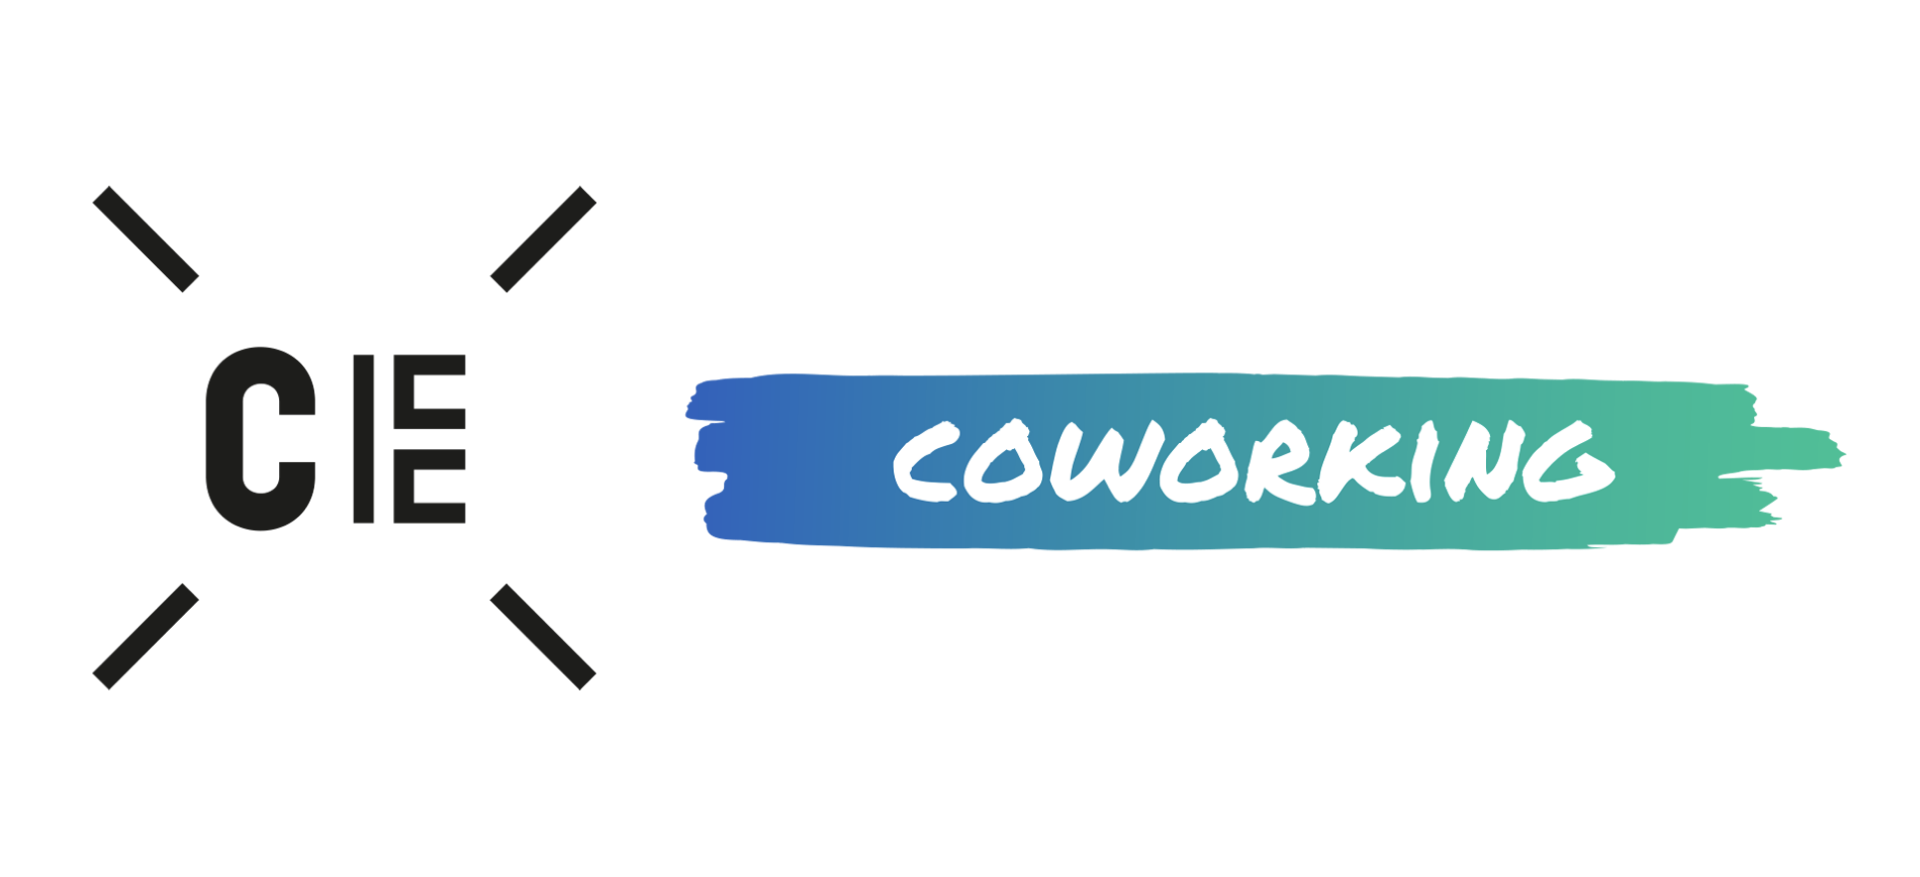 logo-coworking.png